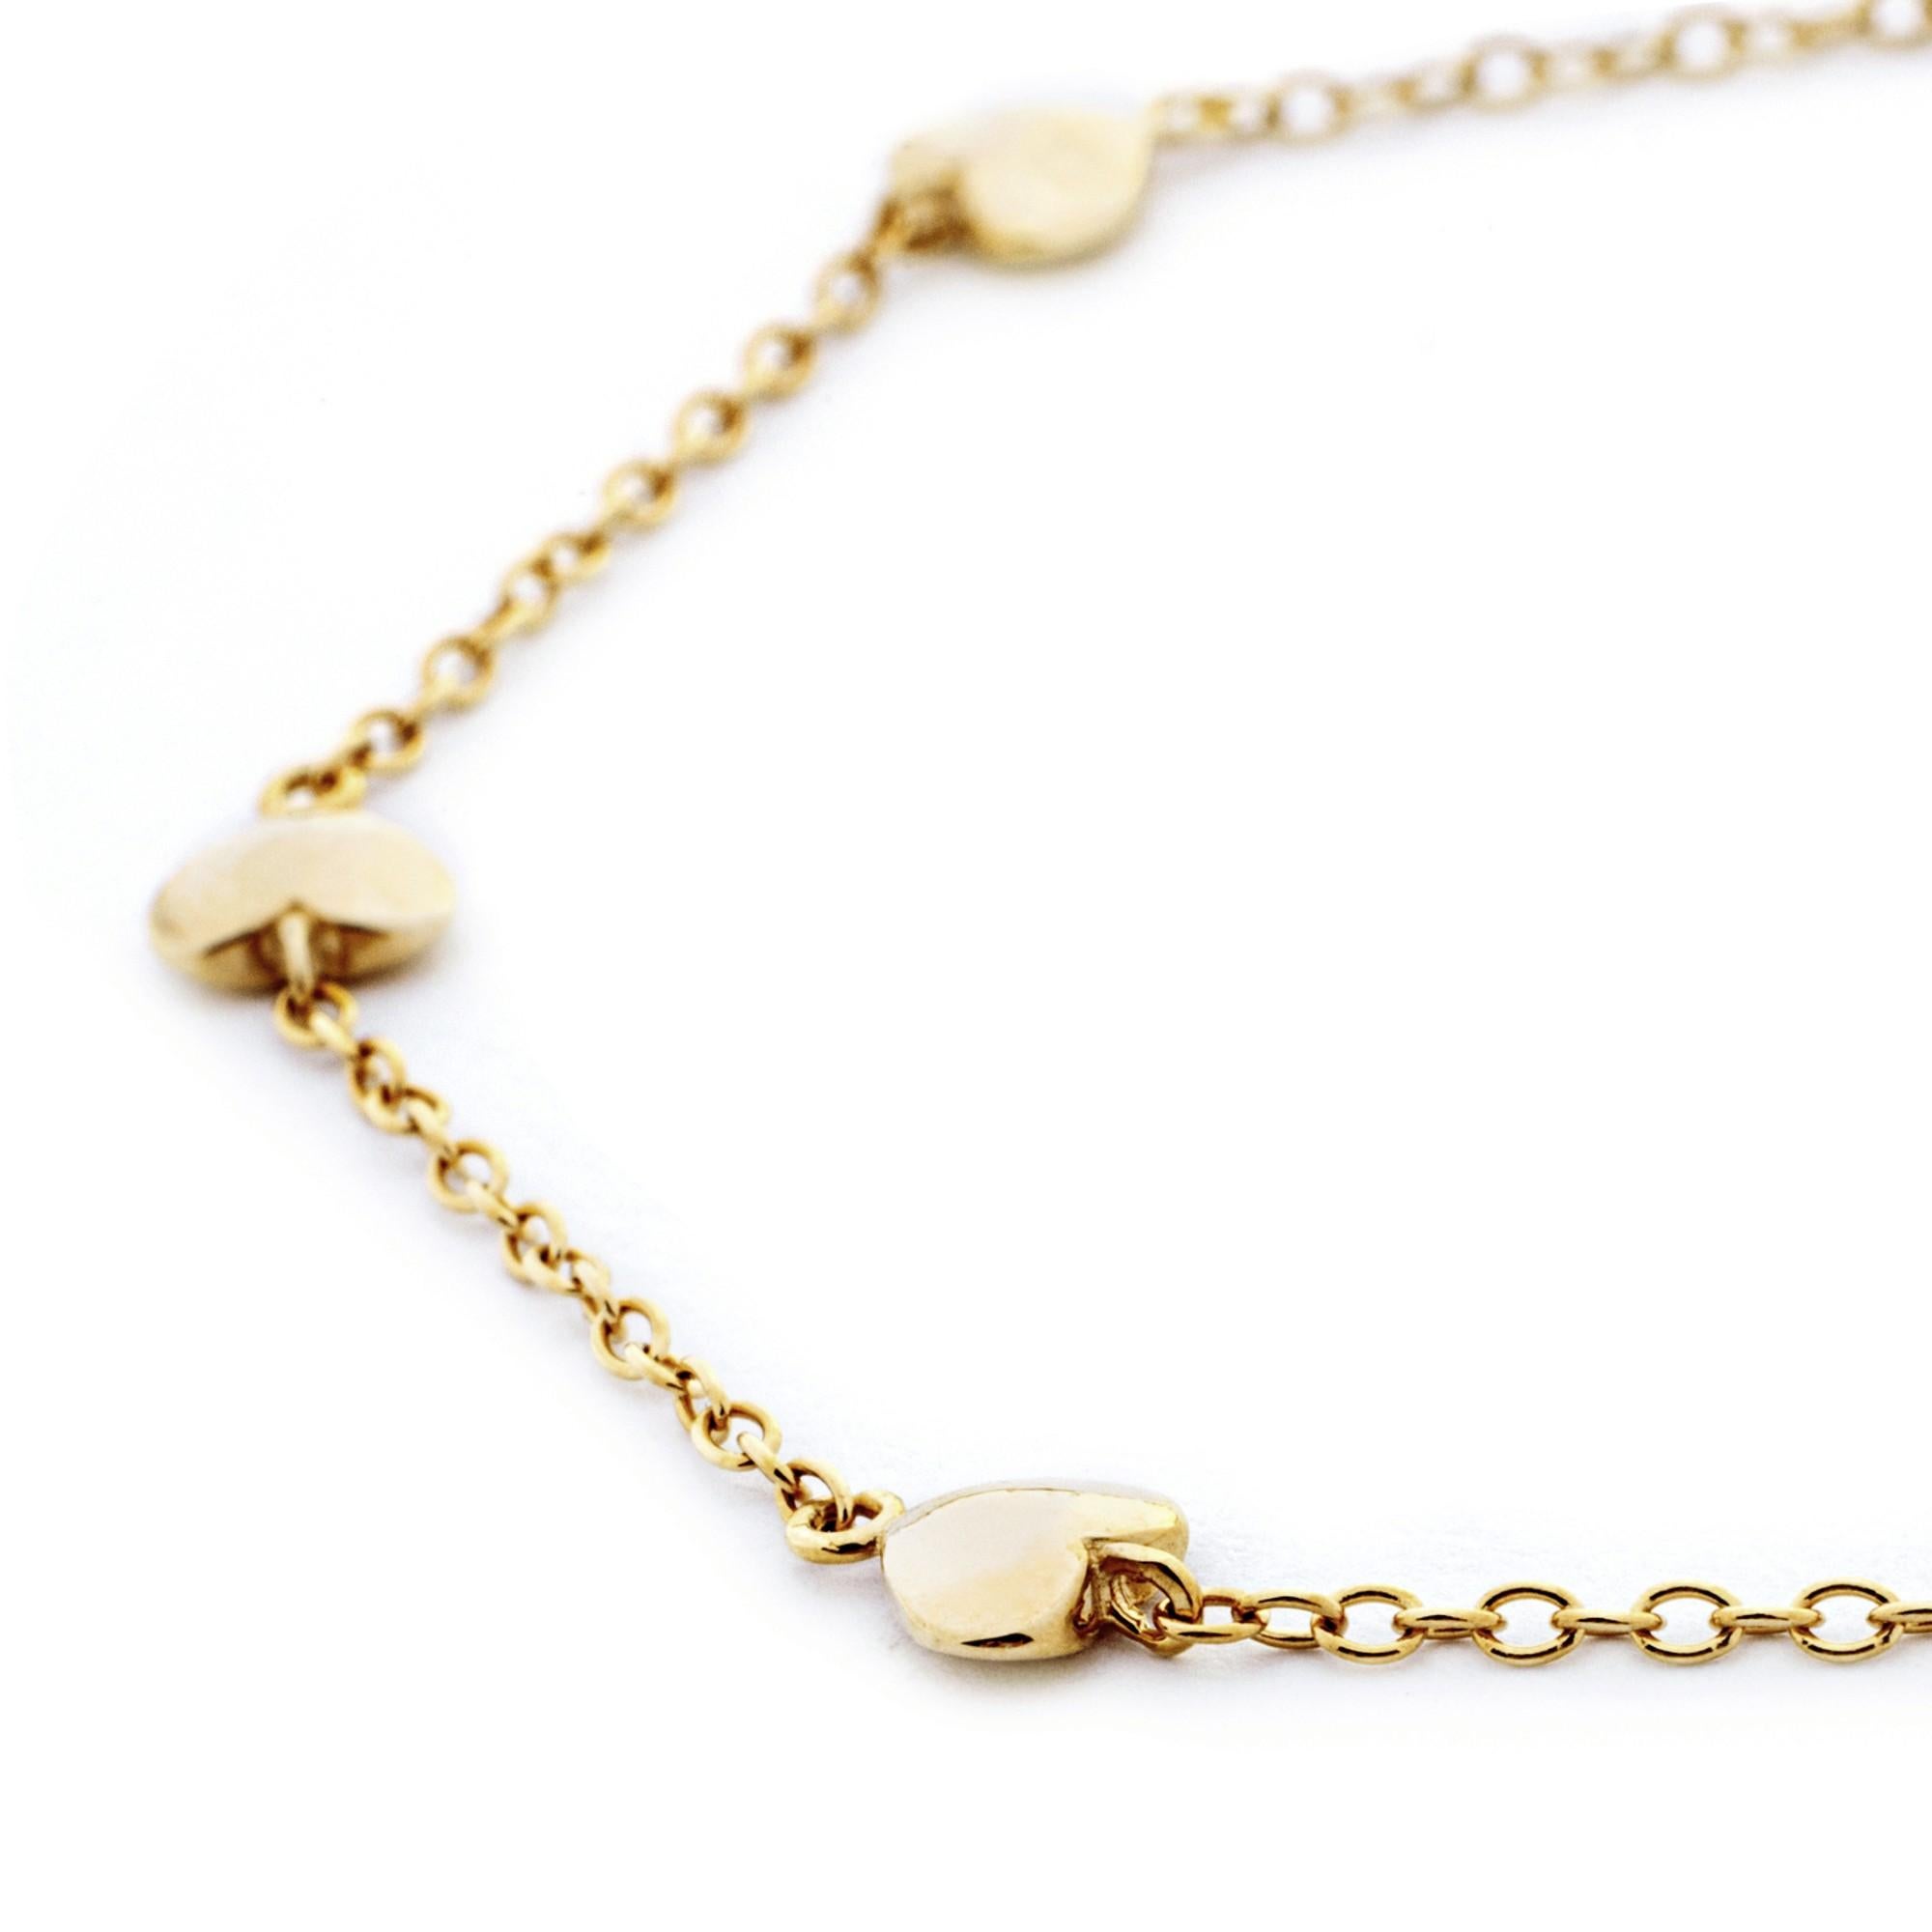 Alex Jona design collection, hand crafted in Italy, 18 karat yellow gold heart chain bracelet.

Alex Jona jewels stand out, not only for their special design and for the excellent quality of the gemstones, but also for the careful attention given to